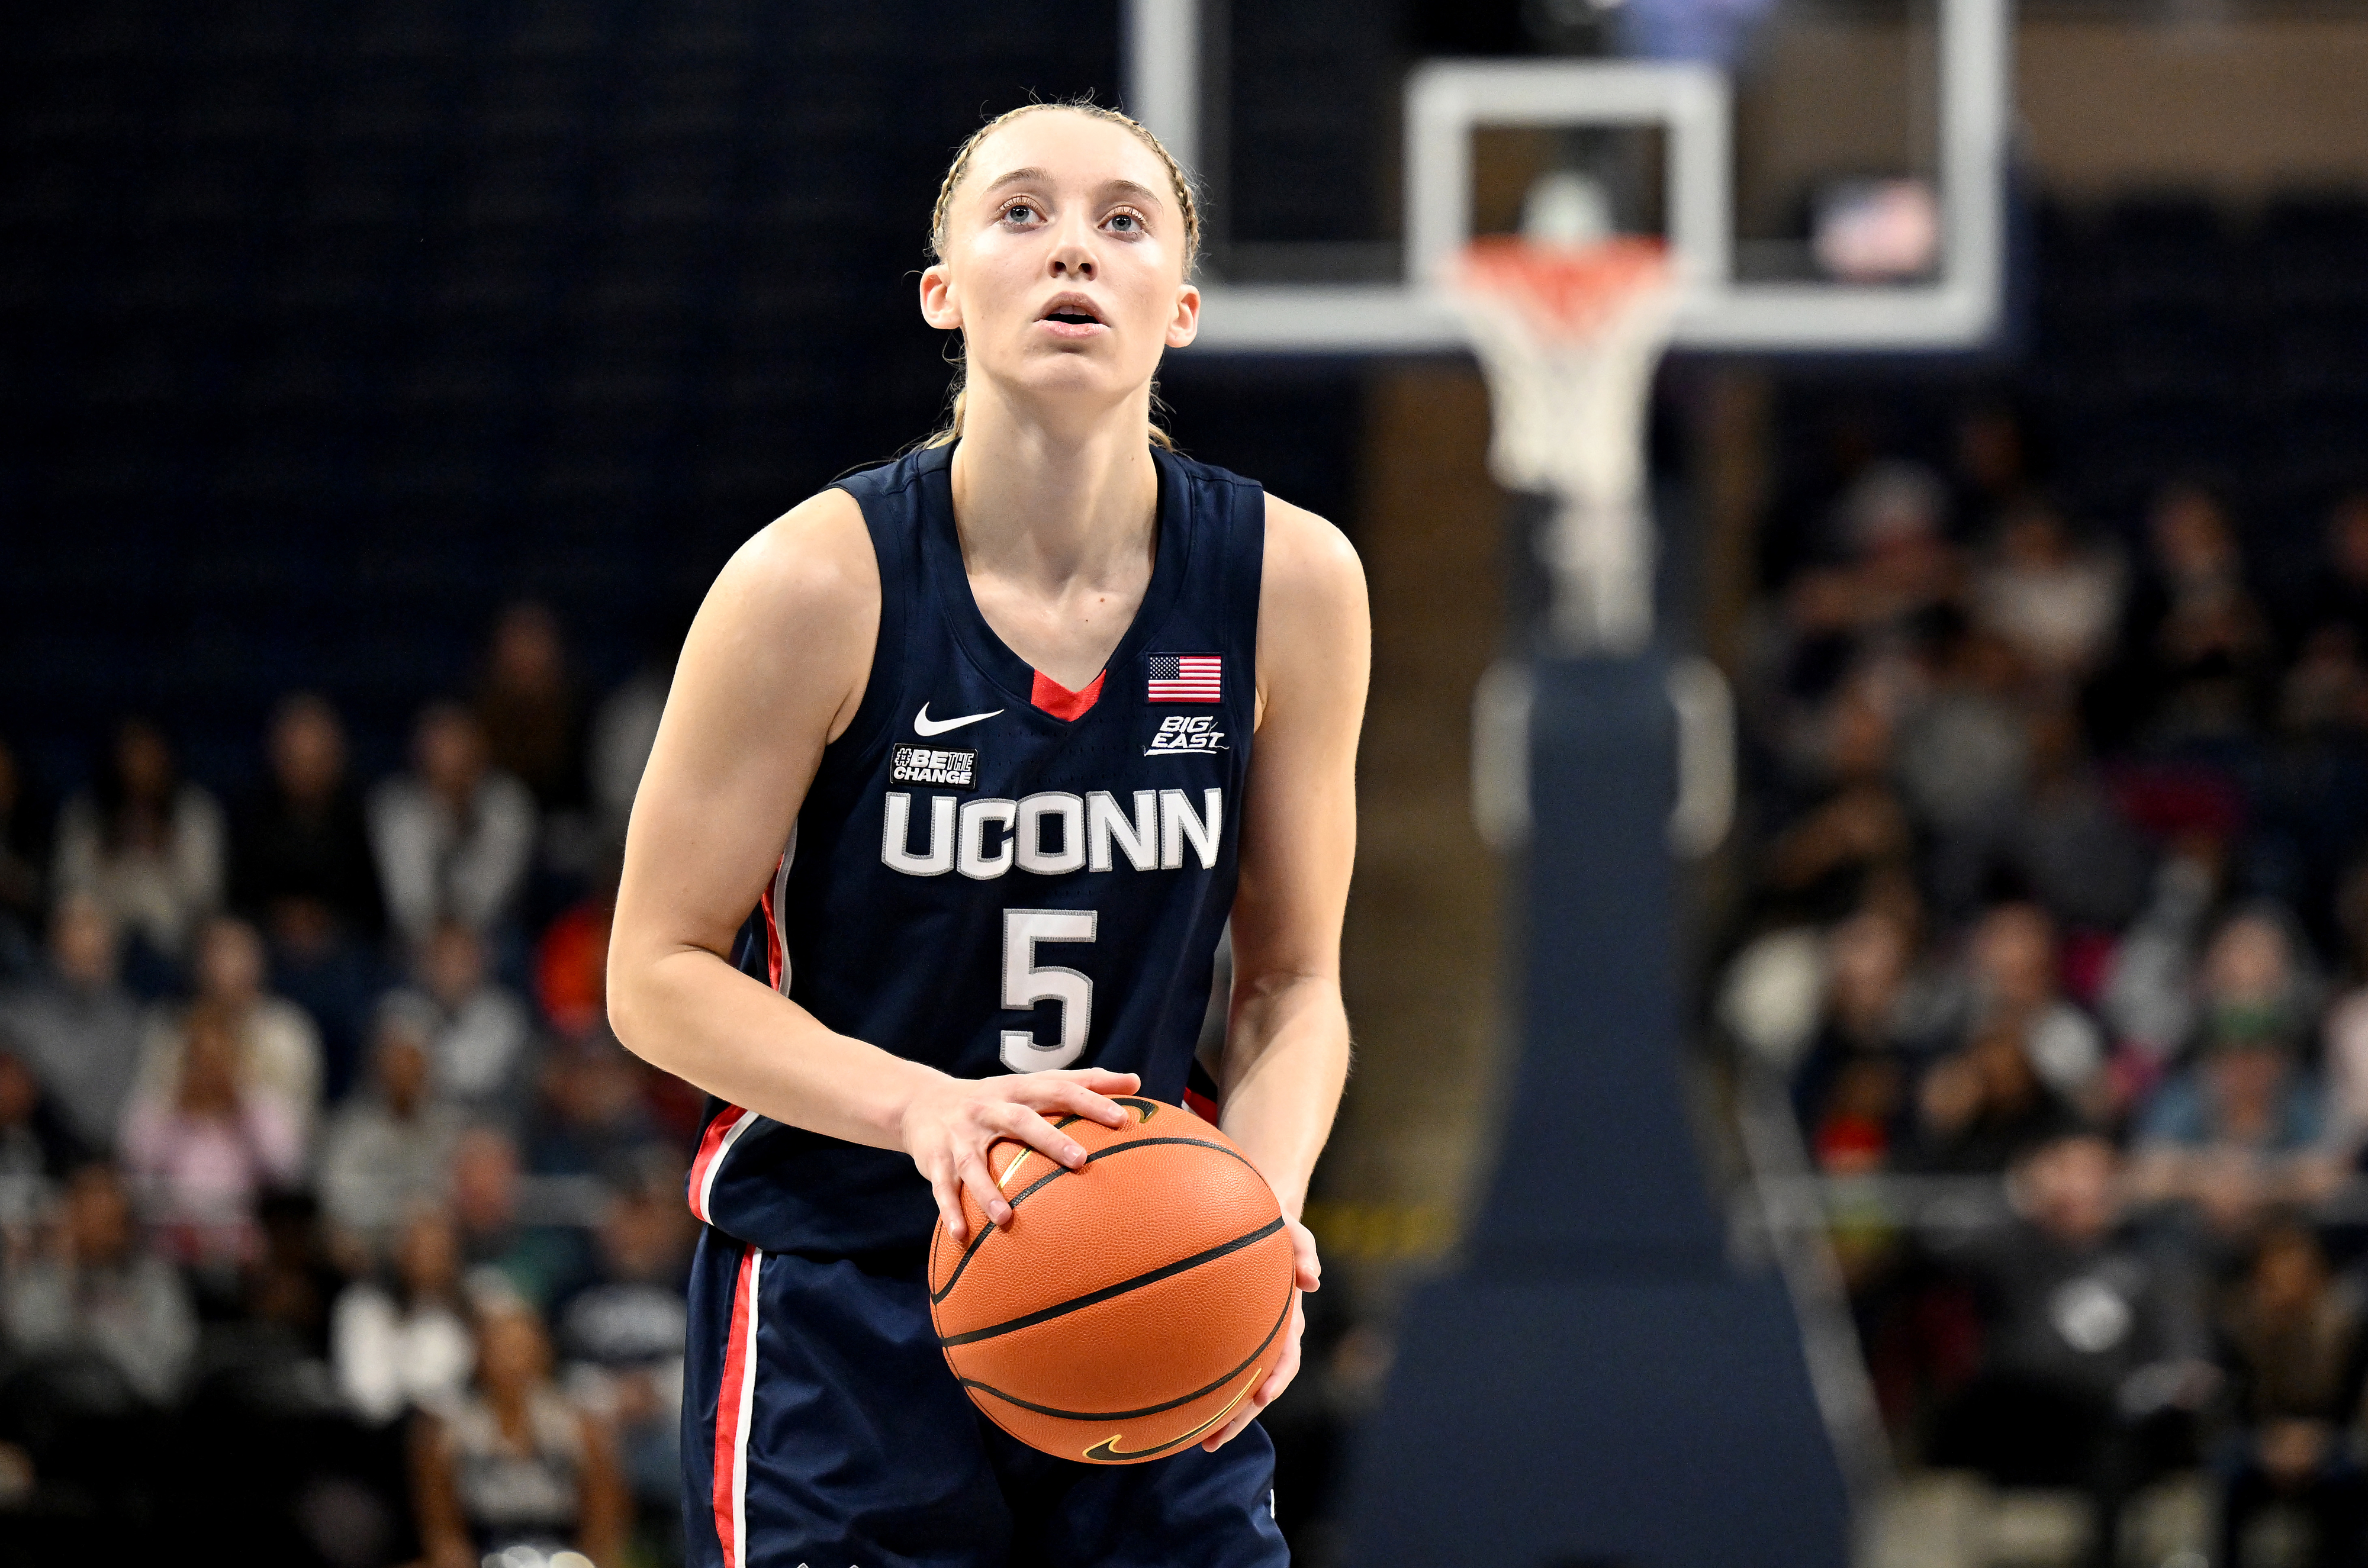 Female basketball player in UCONN uniform prepares for a free throw during a game